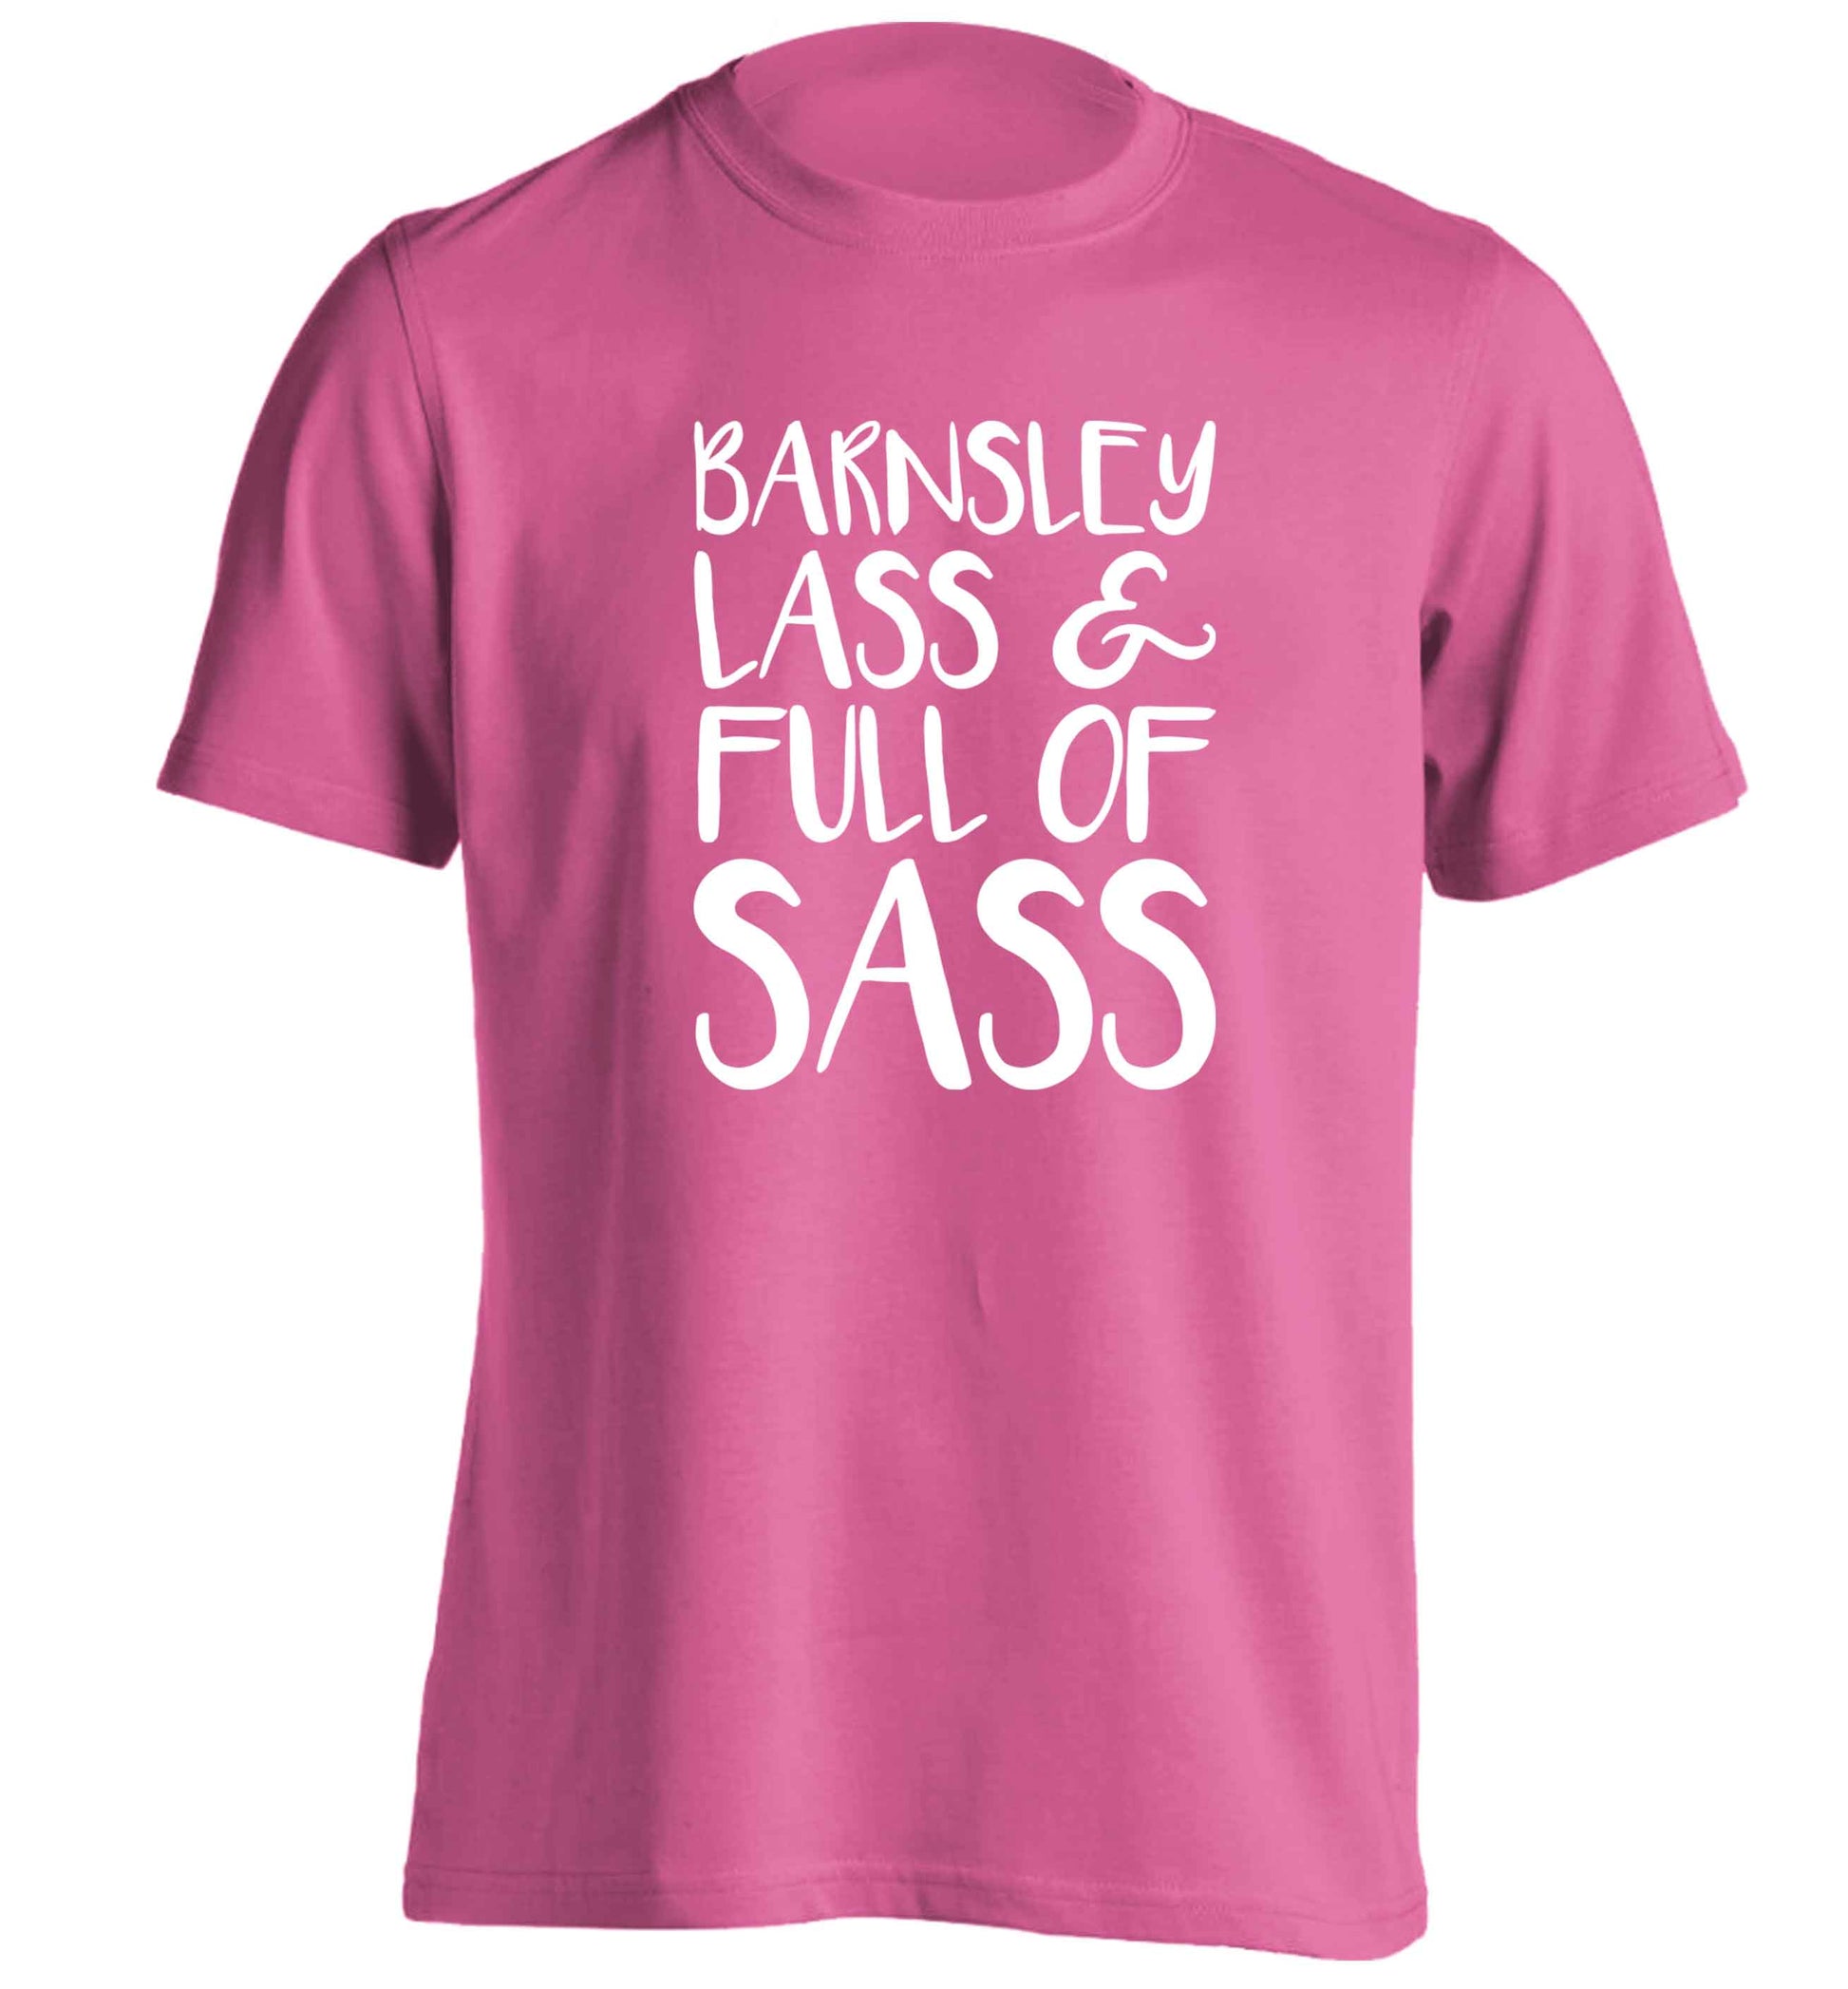 Barnsley lass and full of sass adults unisex pink Tshirt 2XL